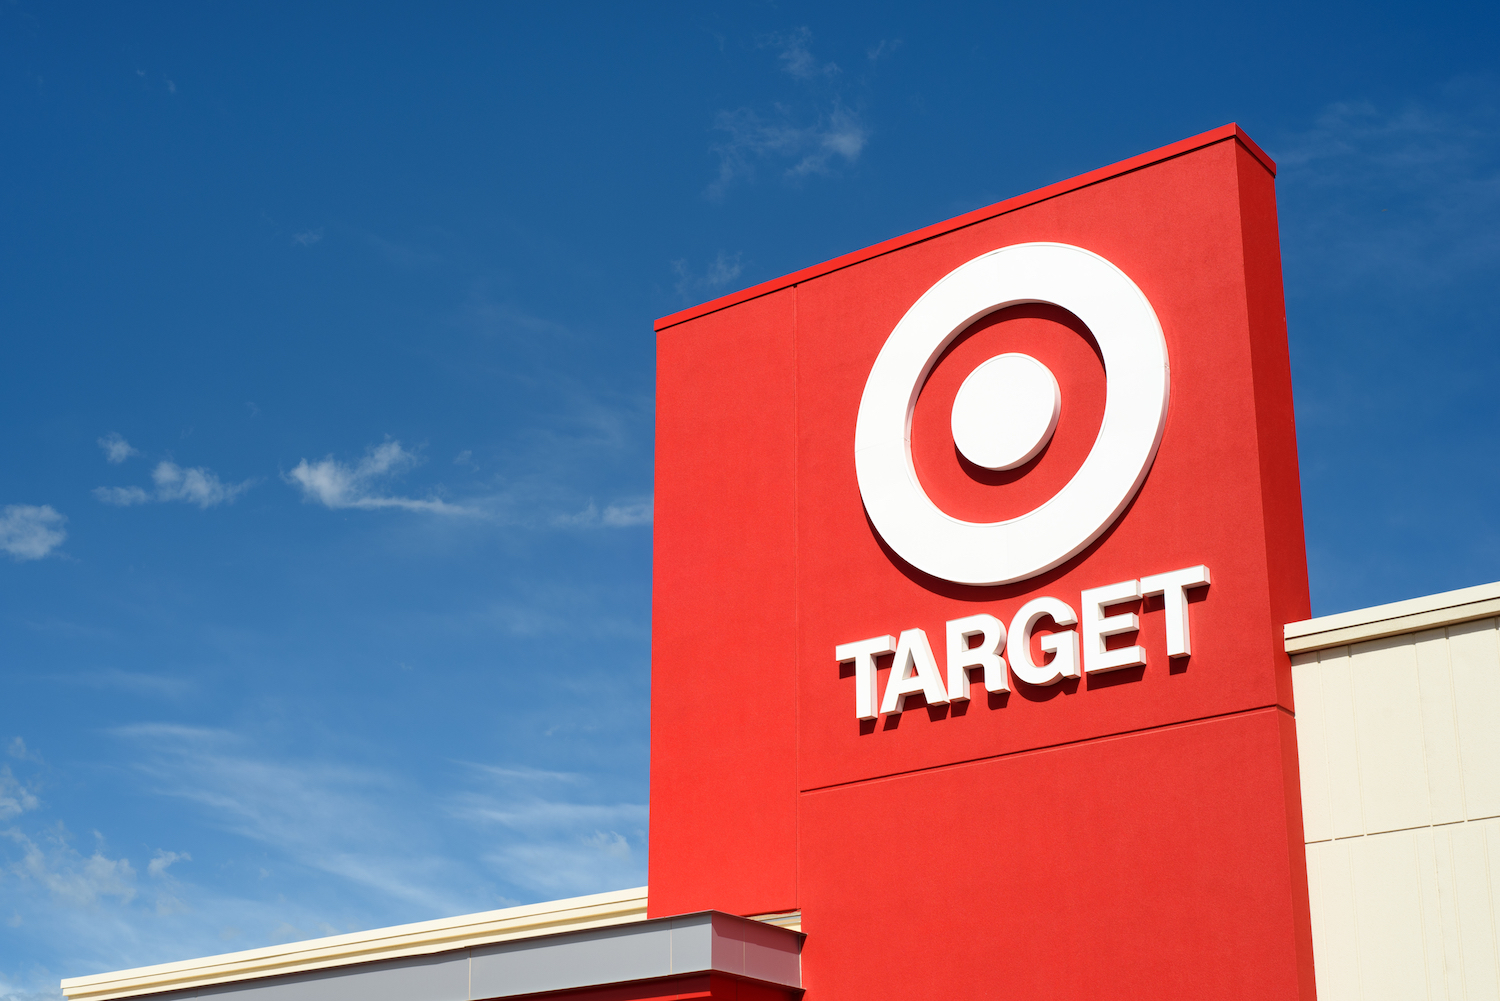 Retail Giant Target Is Quietly Working On A Blockchain For Supply Chains